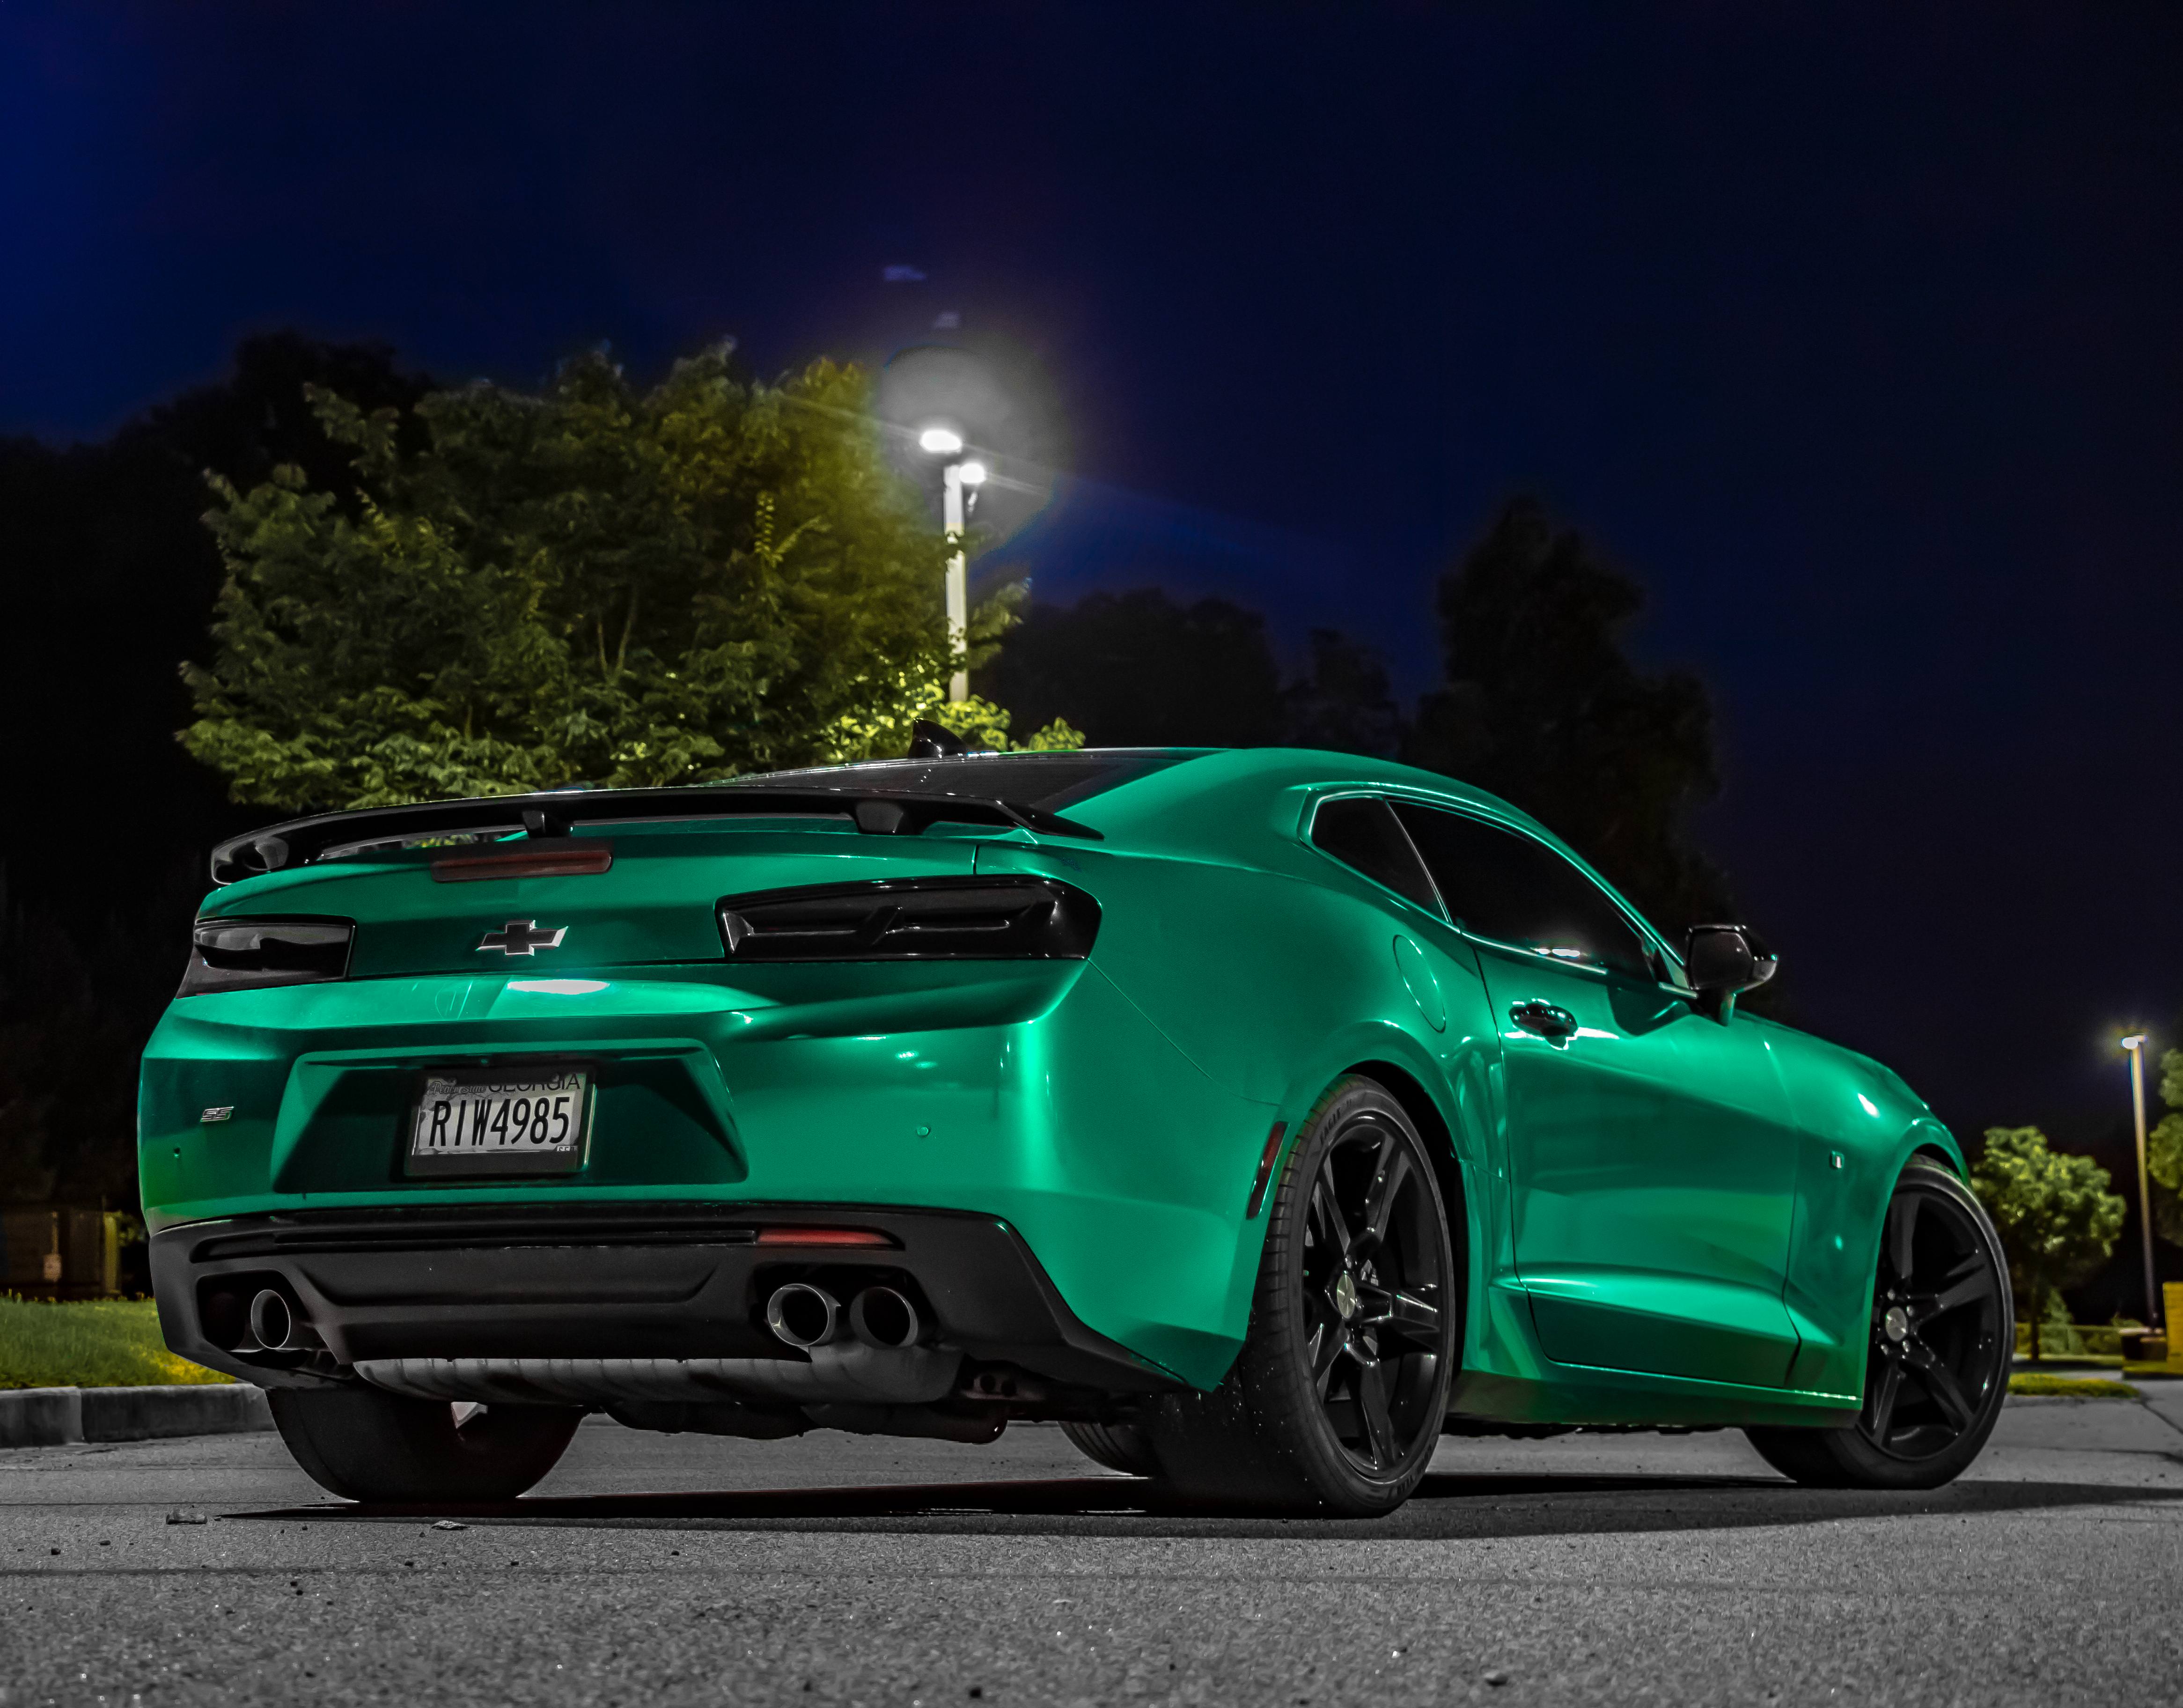 Camaro 4K wallpaper for your desktop or mobile screen free and easy to download